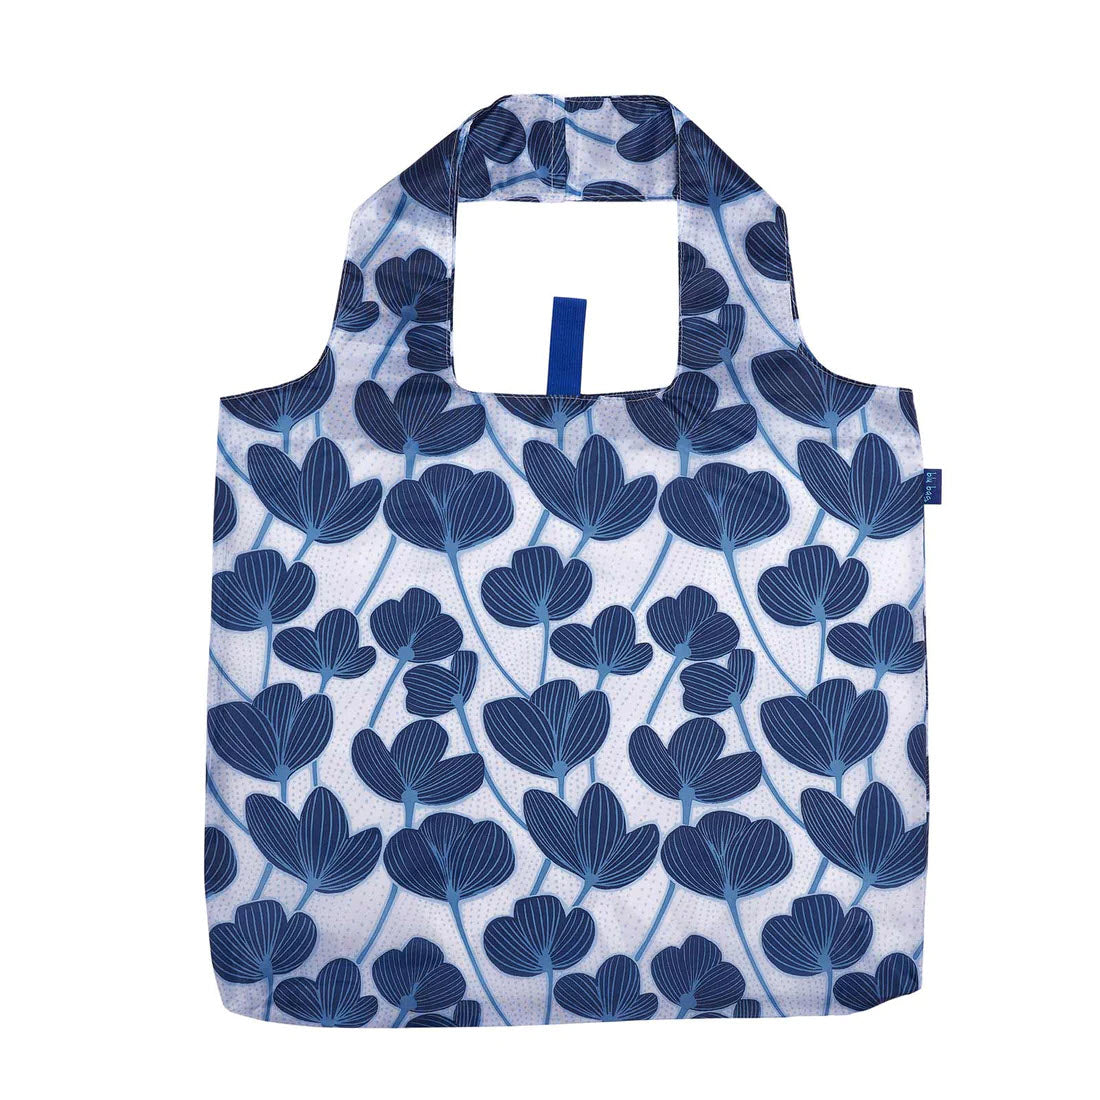 A reusable fabric market shopper bag with a blue and white floral pattern, featuring integrated handles. Try the BLU BAG MODERN POPPY by Rockflowerpaper.